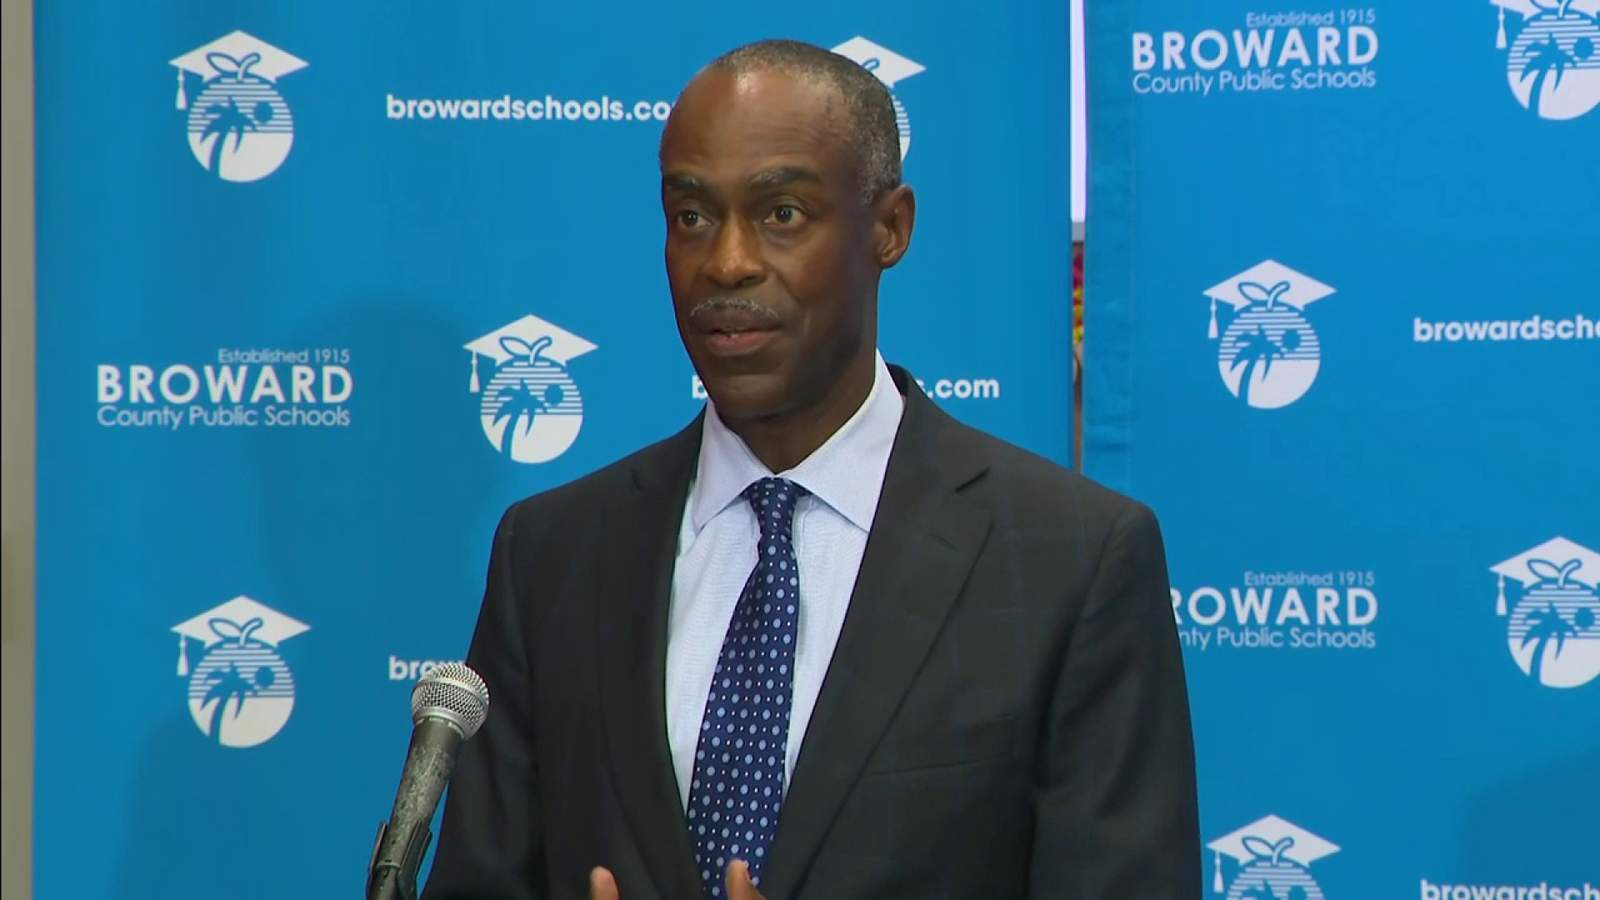 Broward County Public Schools aims for October reopening